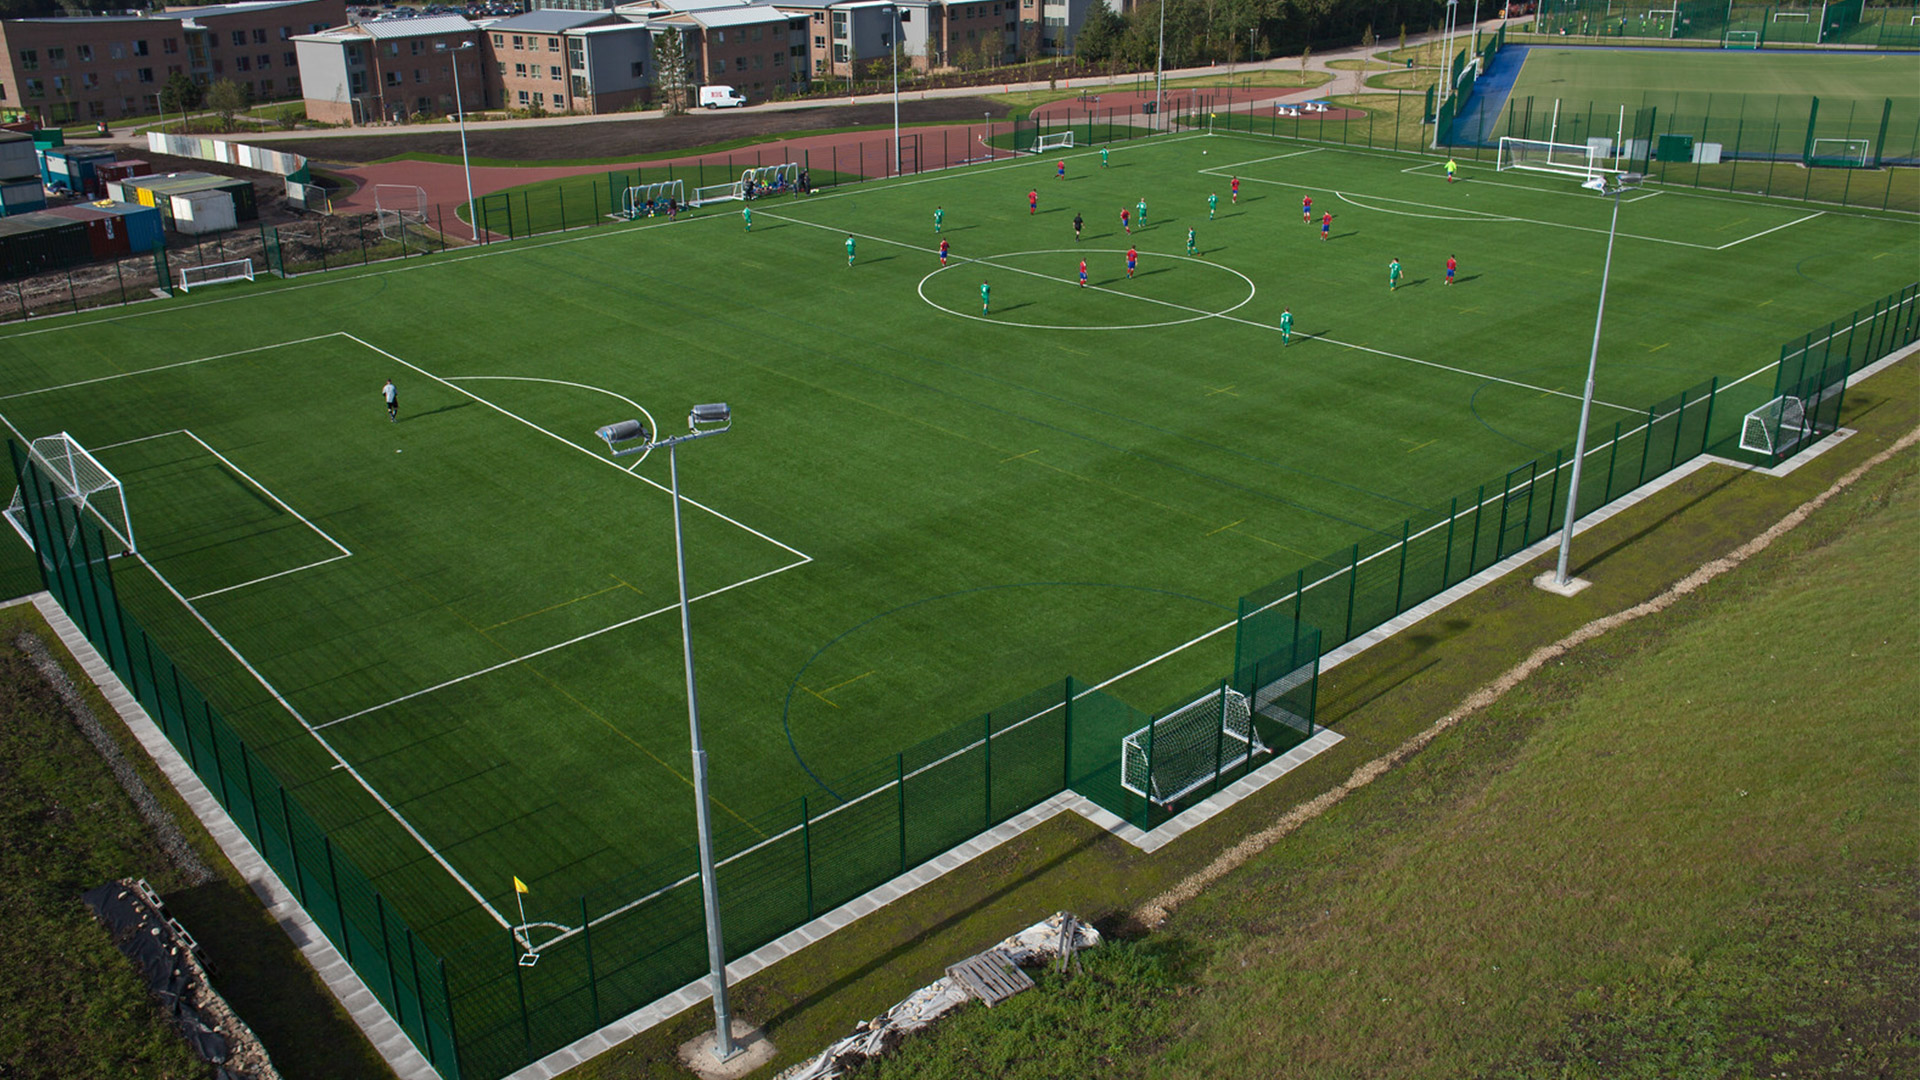 The outdoor football pitch